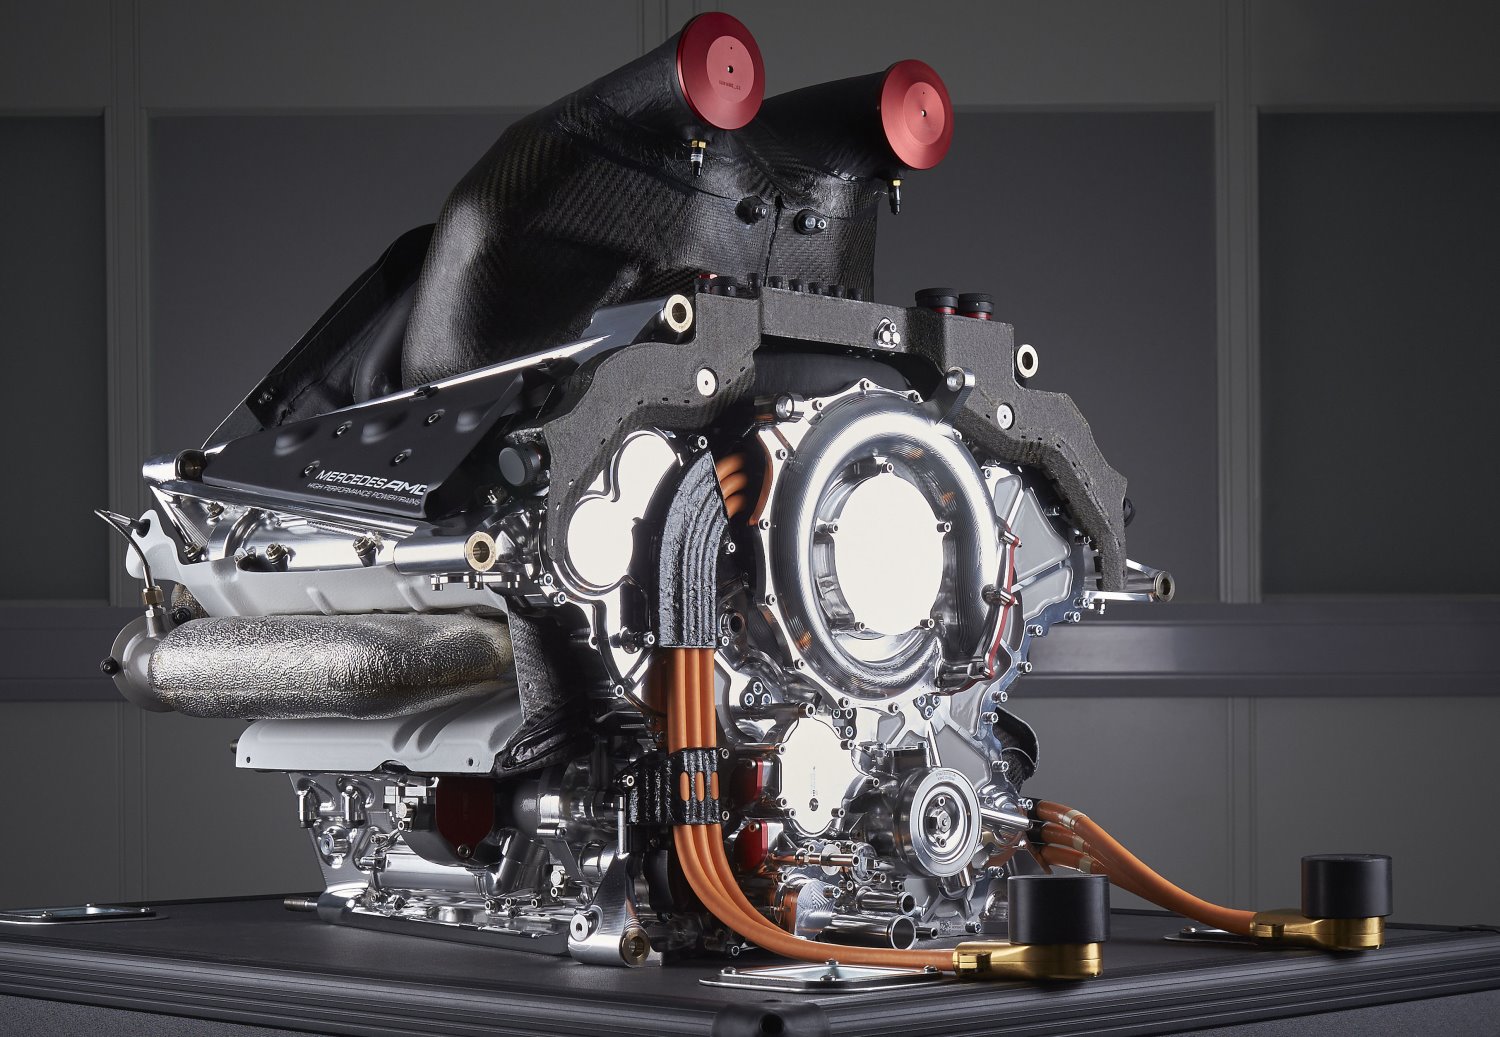 F1 is almost 100% engine formula now - Mercedes cannot be beaten